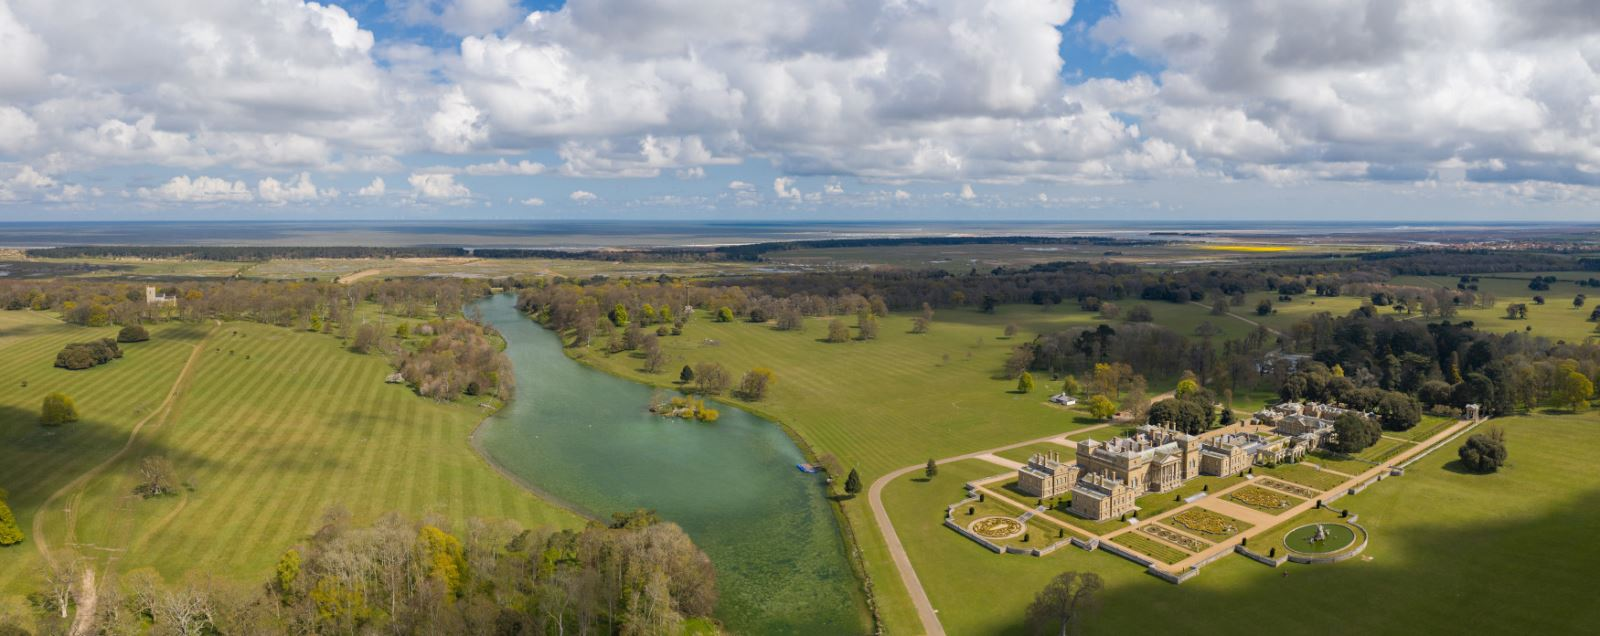 North Norfolk Is one of the most beautiful places in the UK and Holkham Hall is a standout venue 